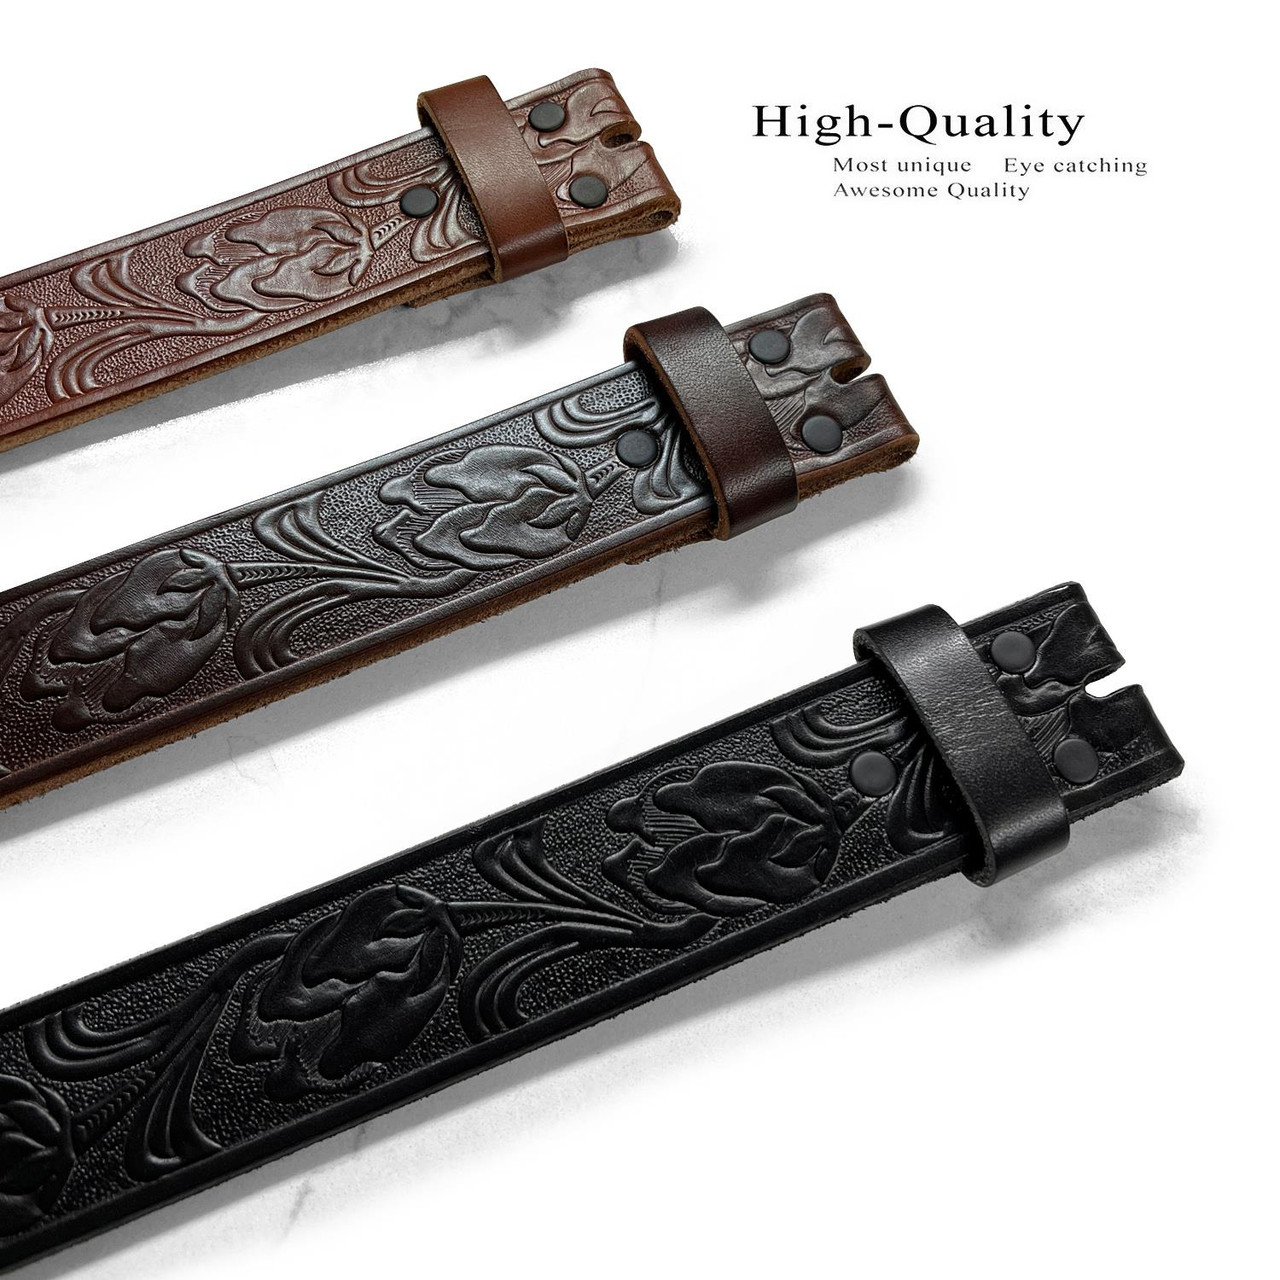 Sepici Leather Strap Natural 1/2 inch to 4 Wide, 60-70 Inches Long (Heavy Weight)